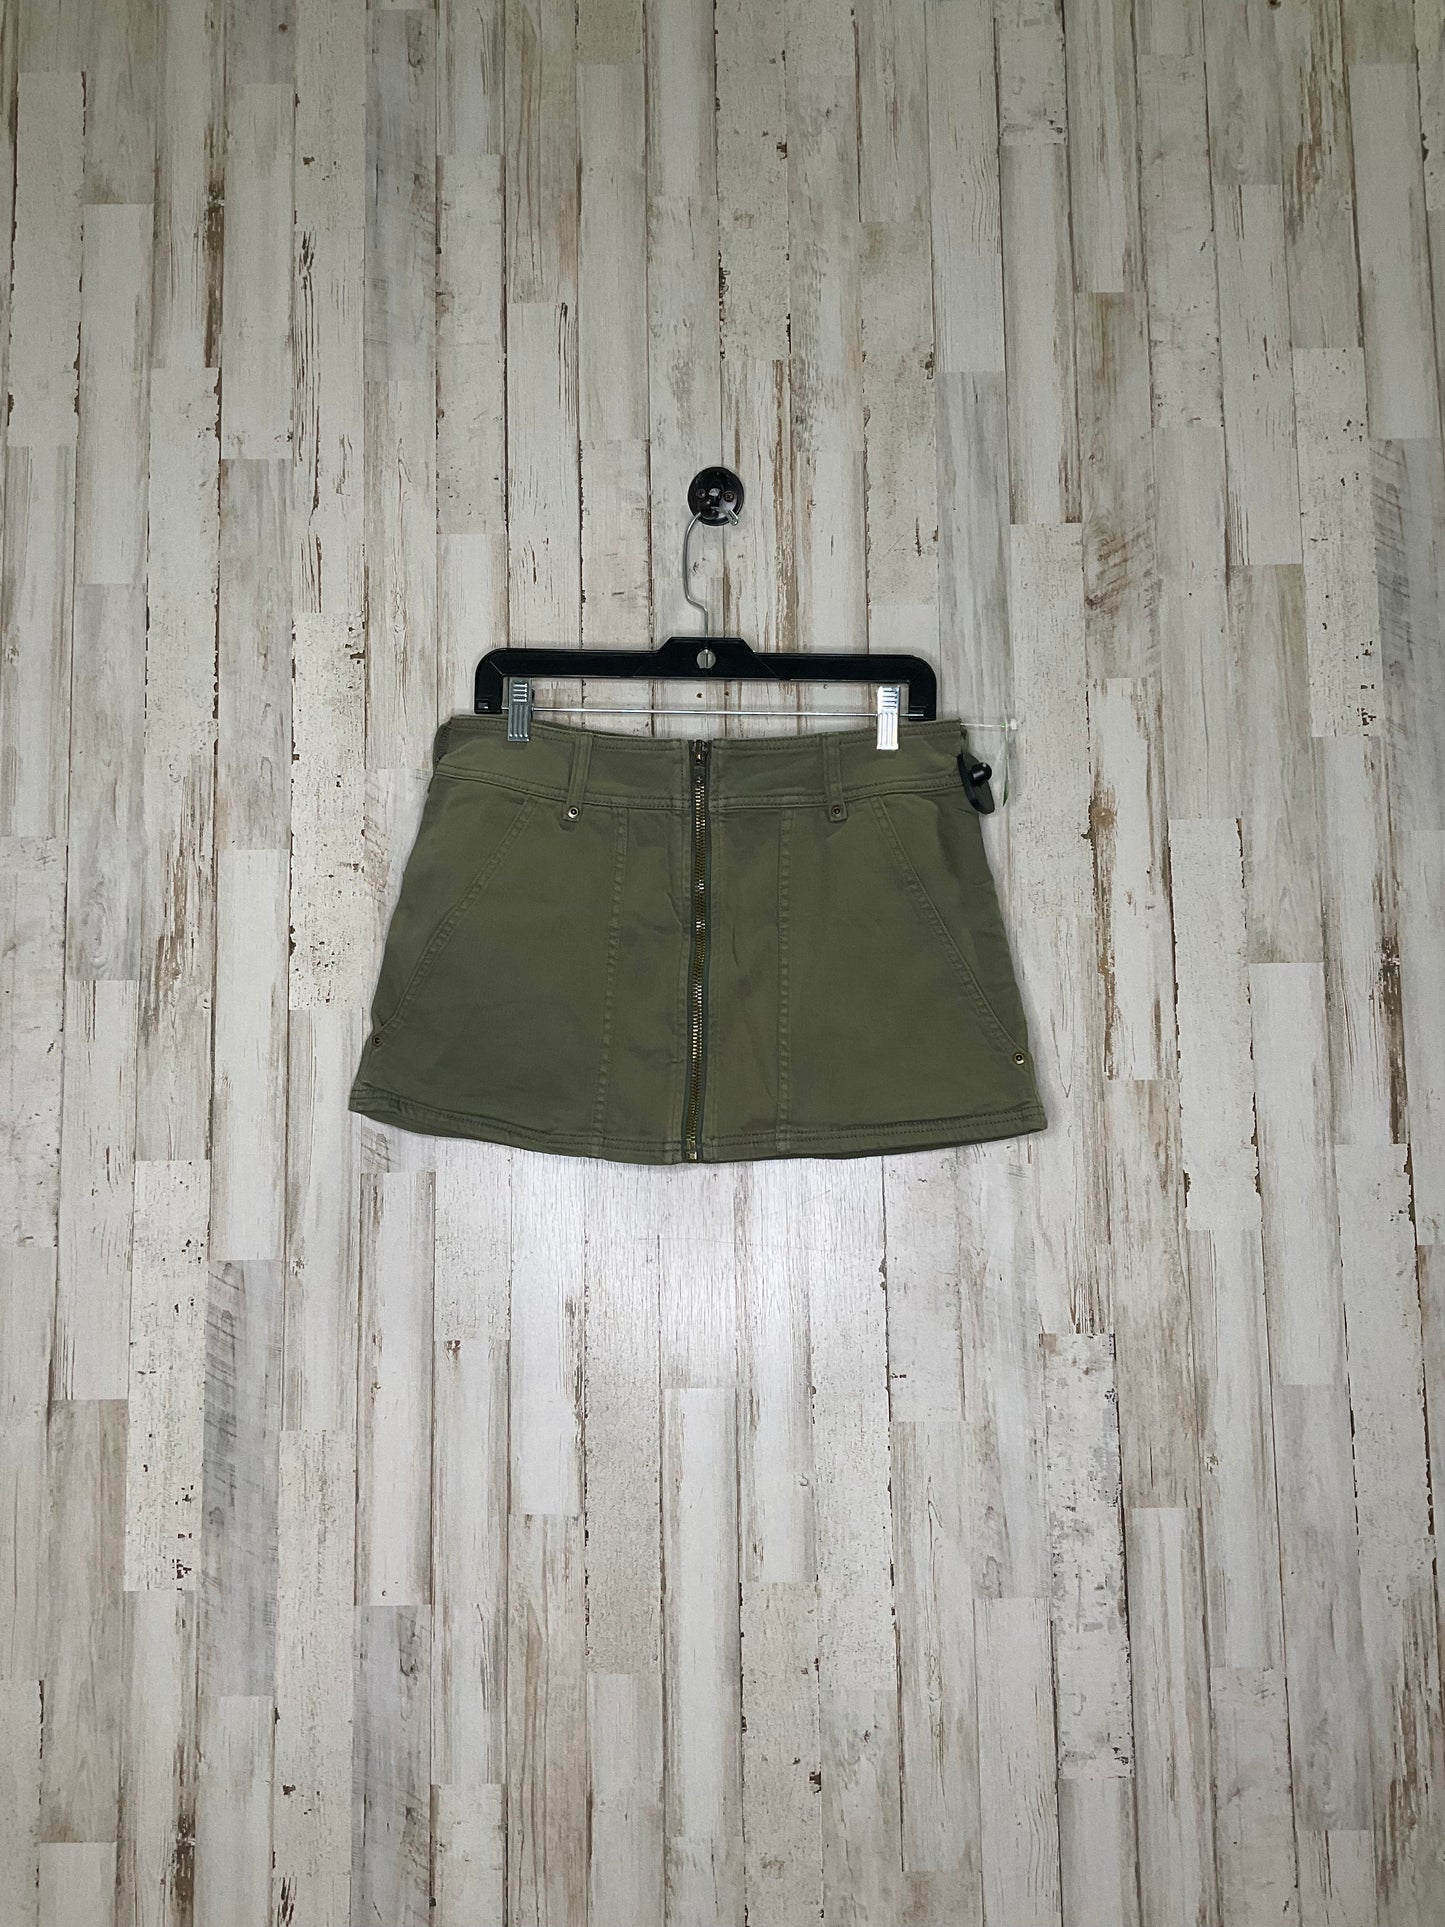 Skirt Mini & Short By Free People  Size: 8